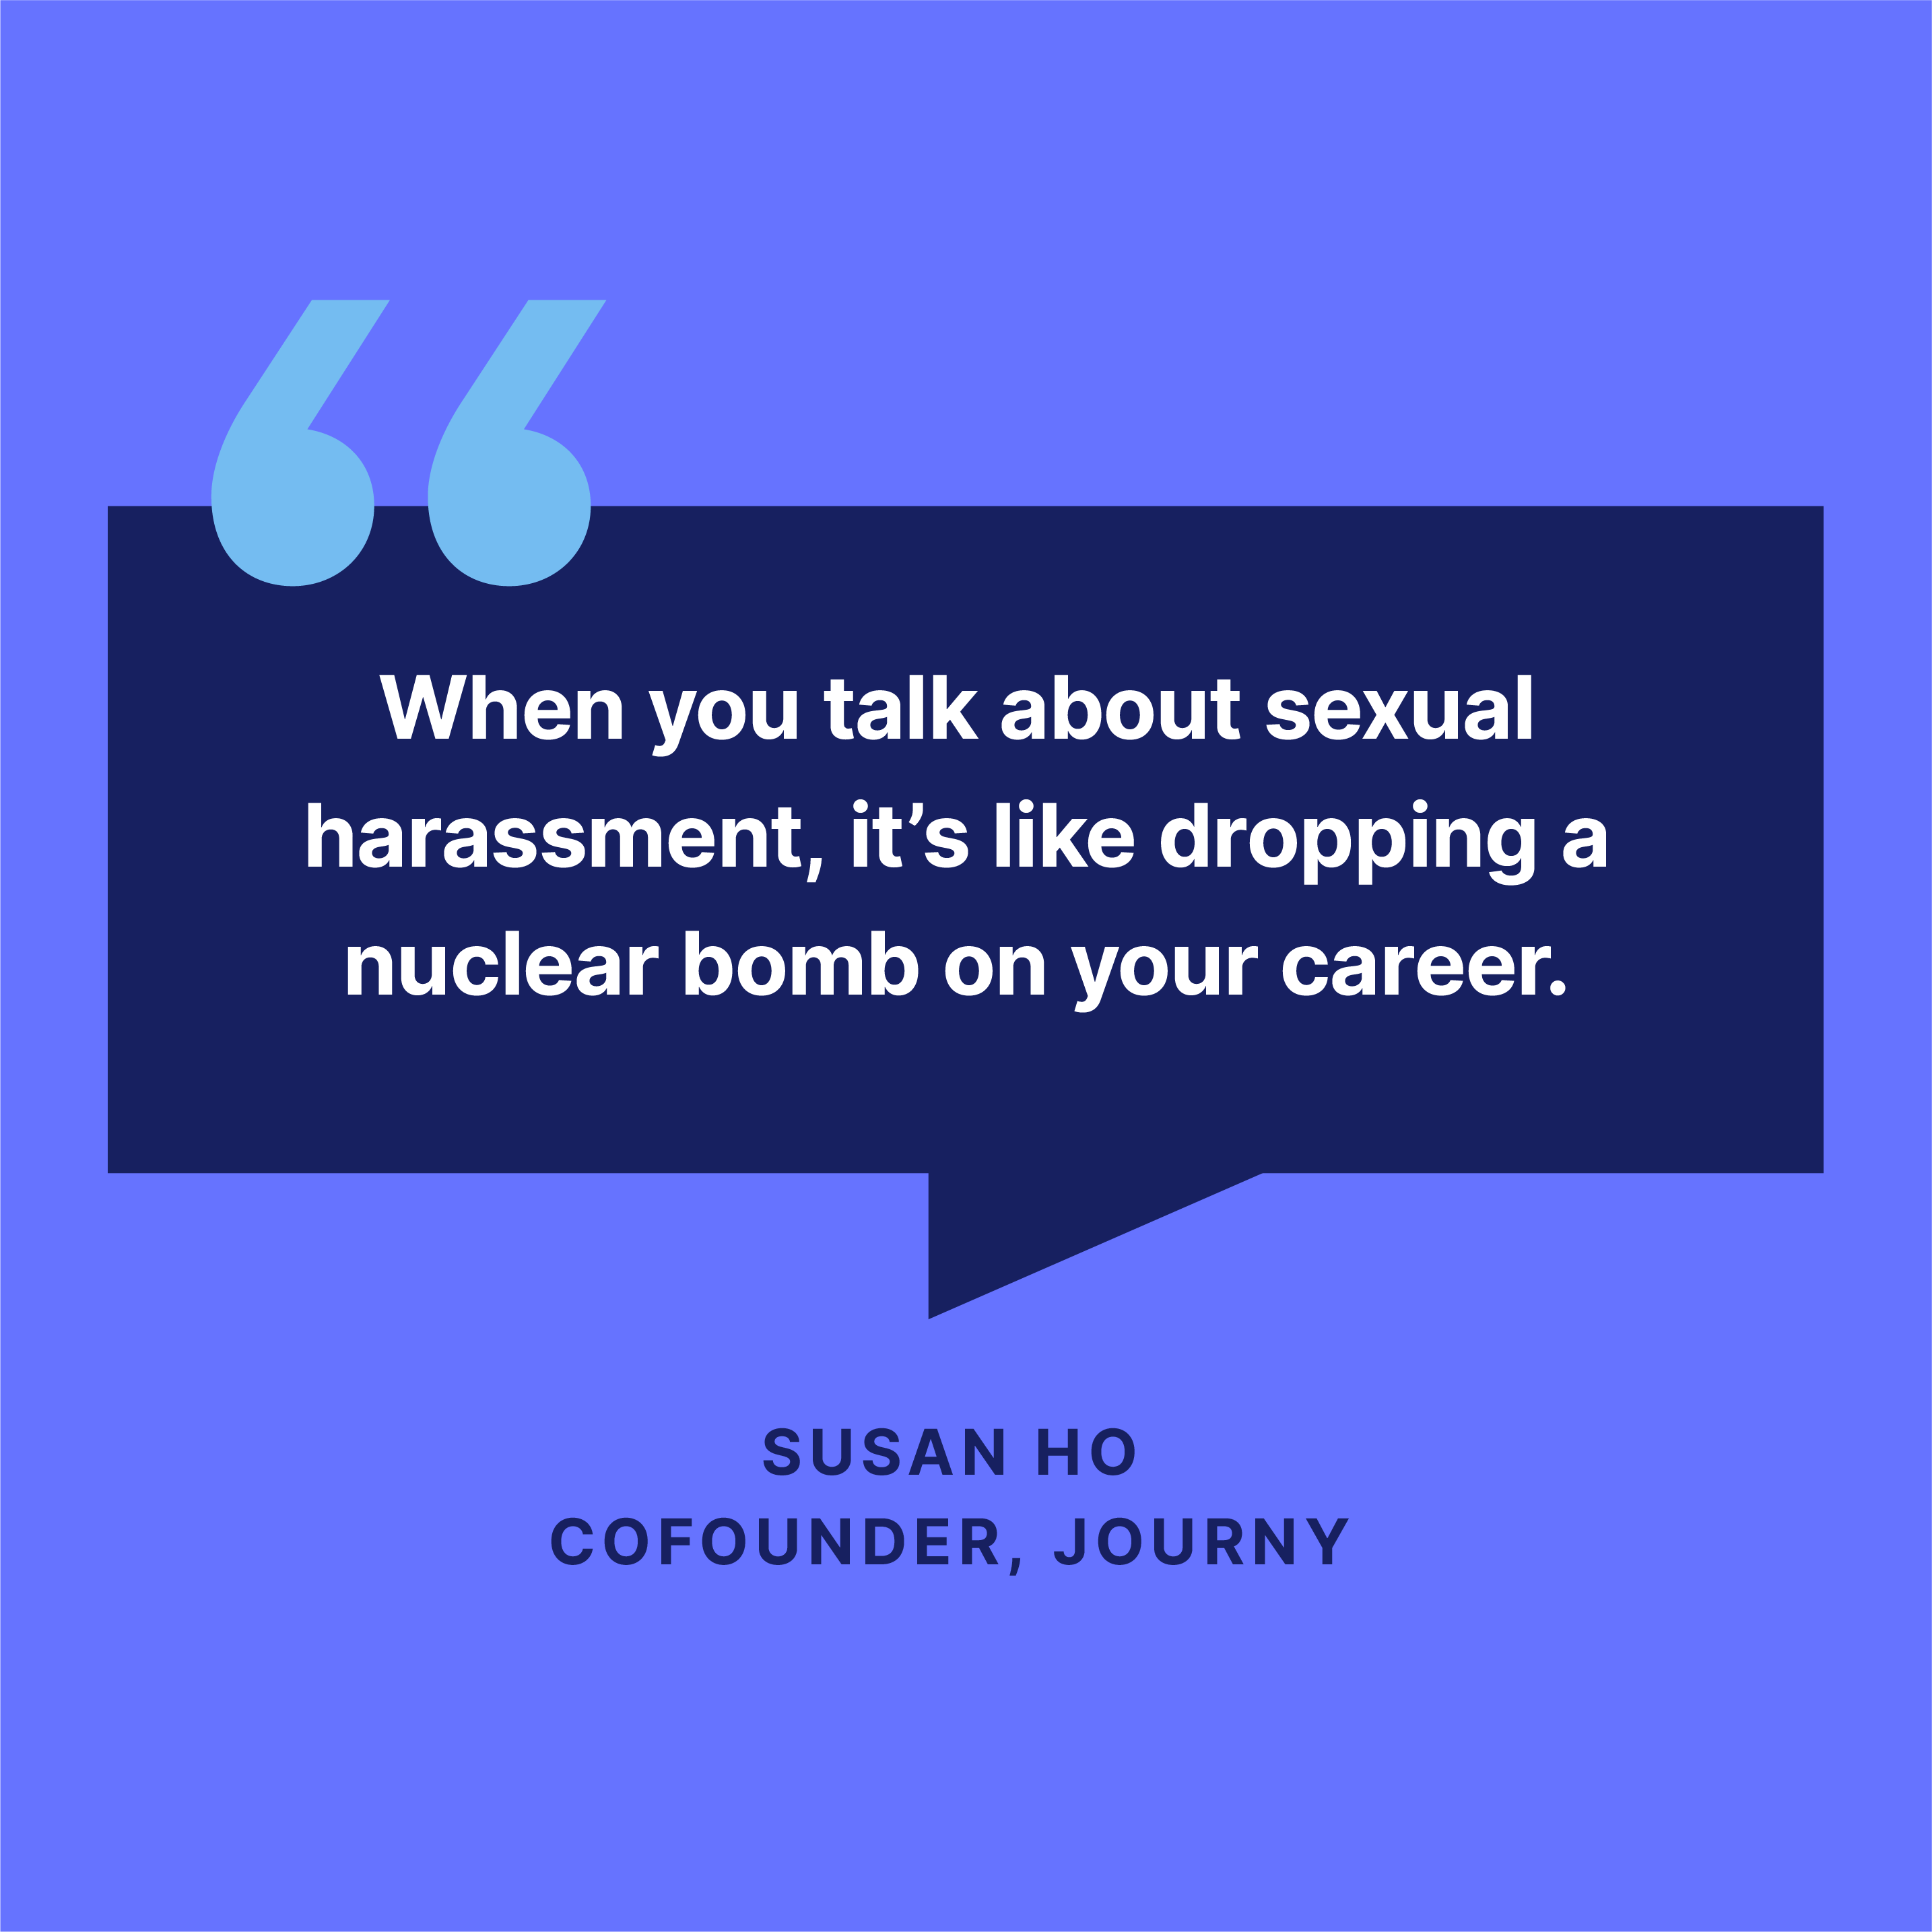 When you talk about sexual harassment, it's like dropping a nuclear bomb on your career says Susan Ho.